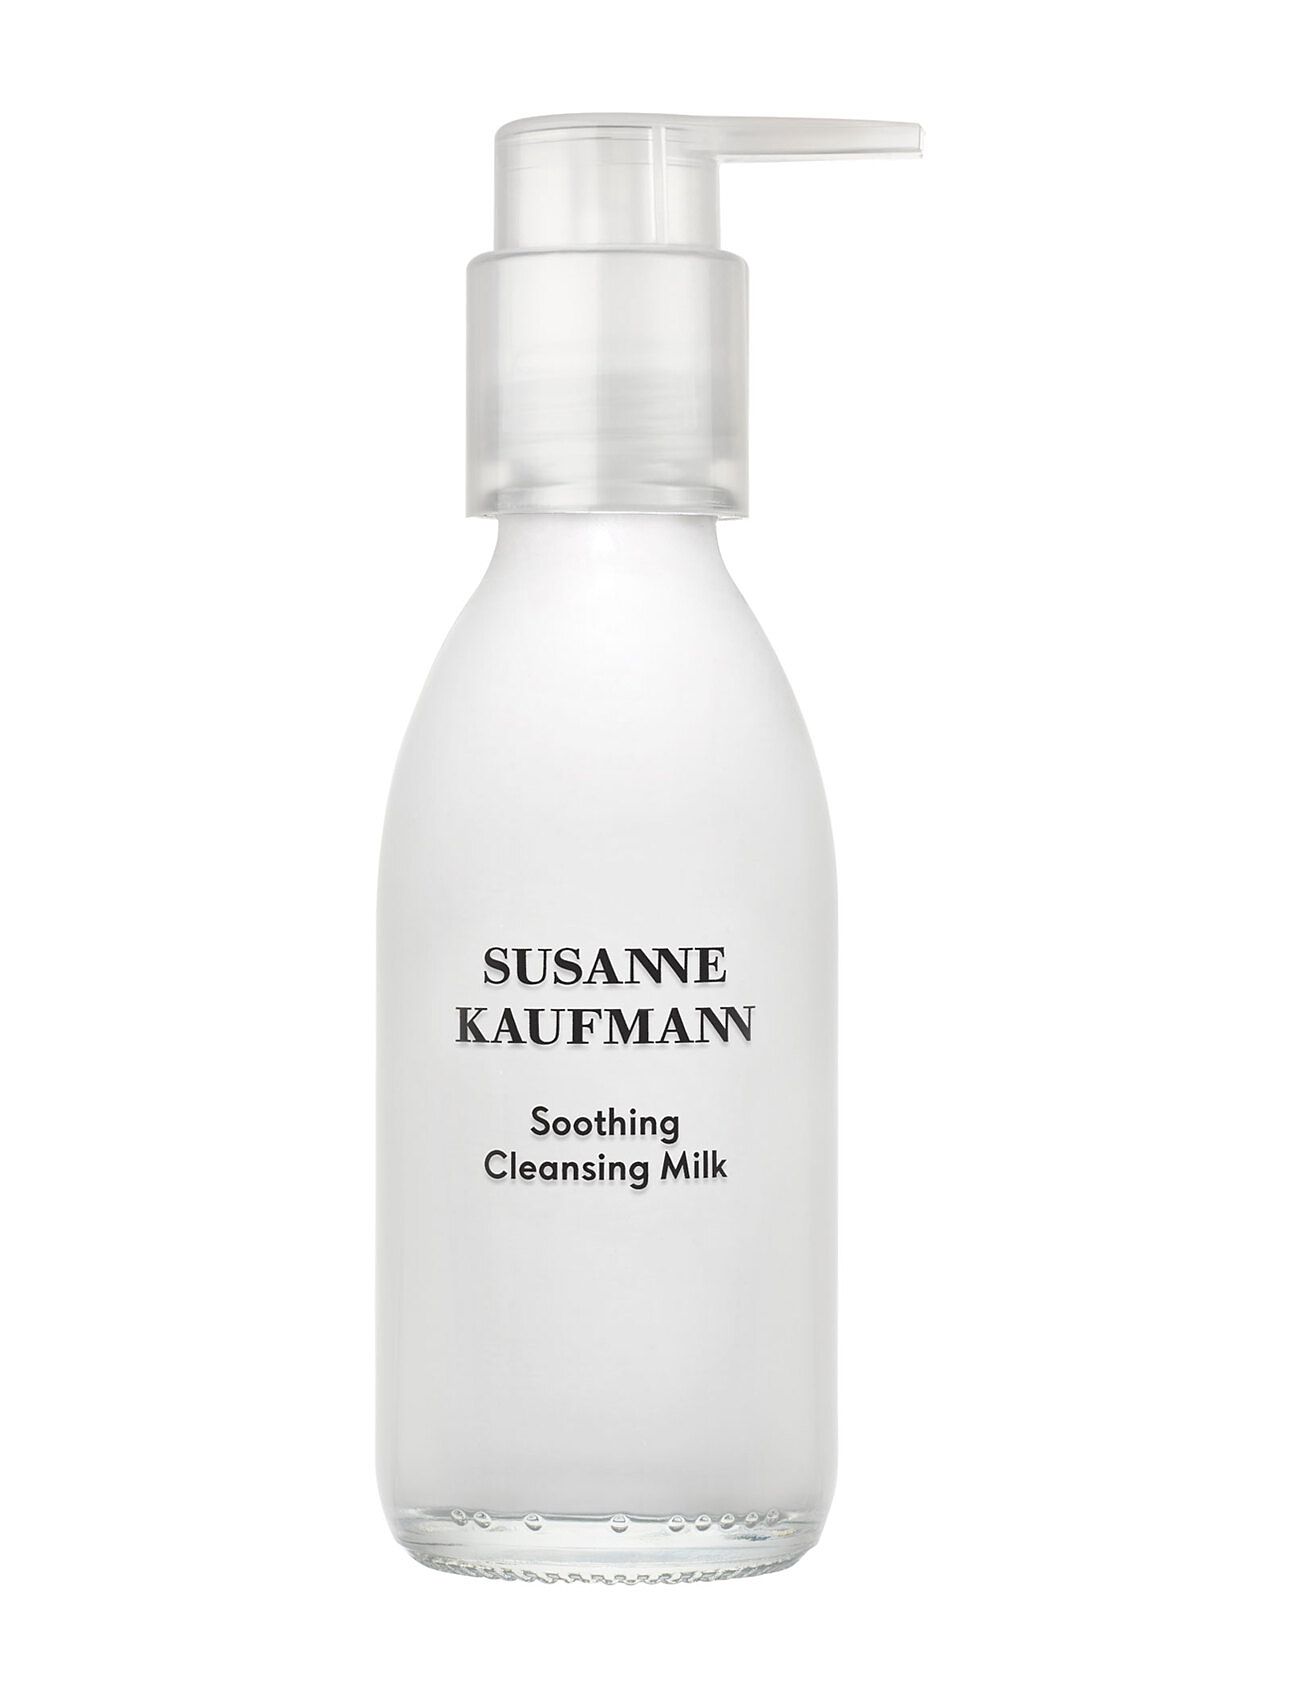 Soothing Cleansing Milk 100 Ml Beauty Women Skin Care Face Cleansers Milk Cleanser Nude Susanne Kaufman